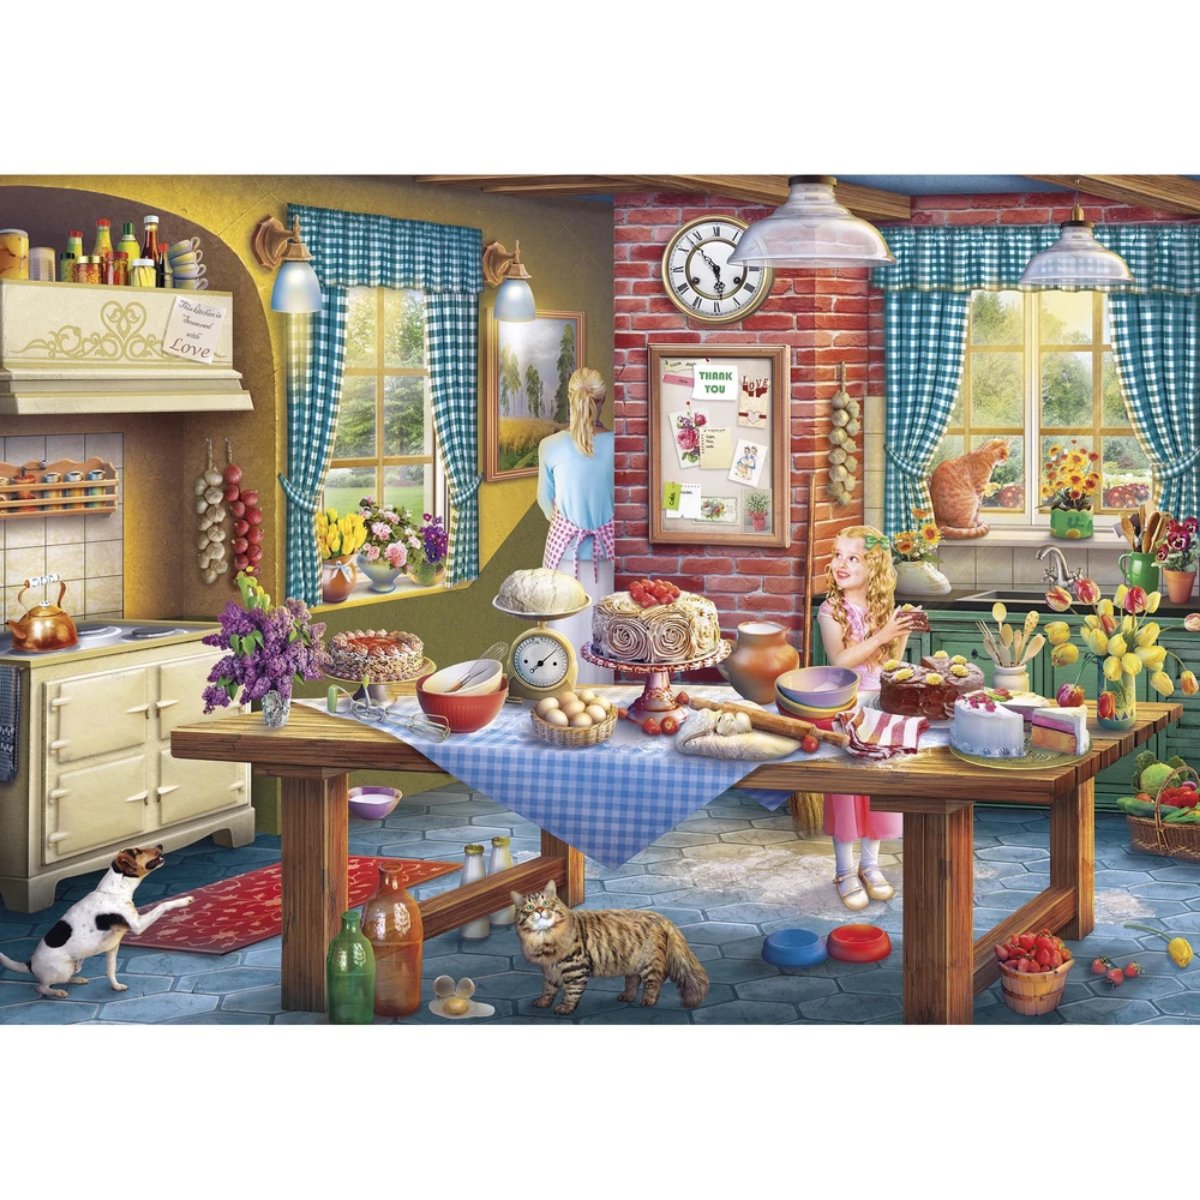 Gibsons Sneaking a Slice Jigsaw Puzzle (100 XXL Pieces)